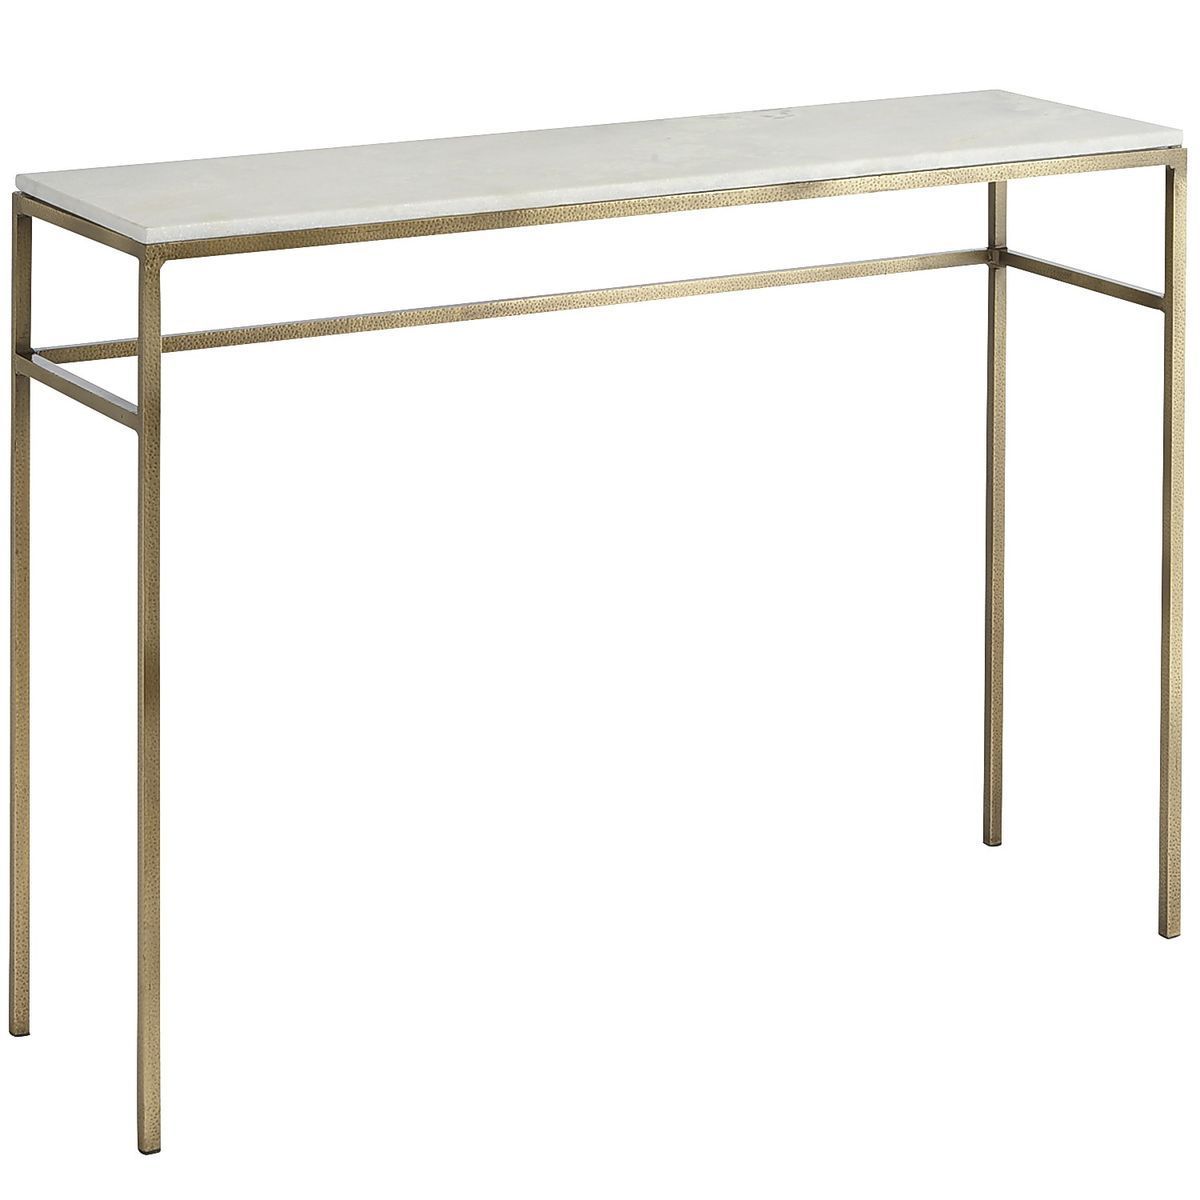 If You're Looking For A Way To Elevate Your Living Space, Ethel Regarding Elke Marble Console Tables With Brass Base (View 6 of 30)